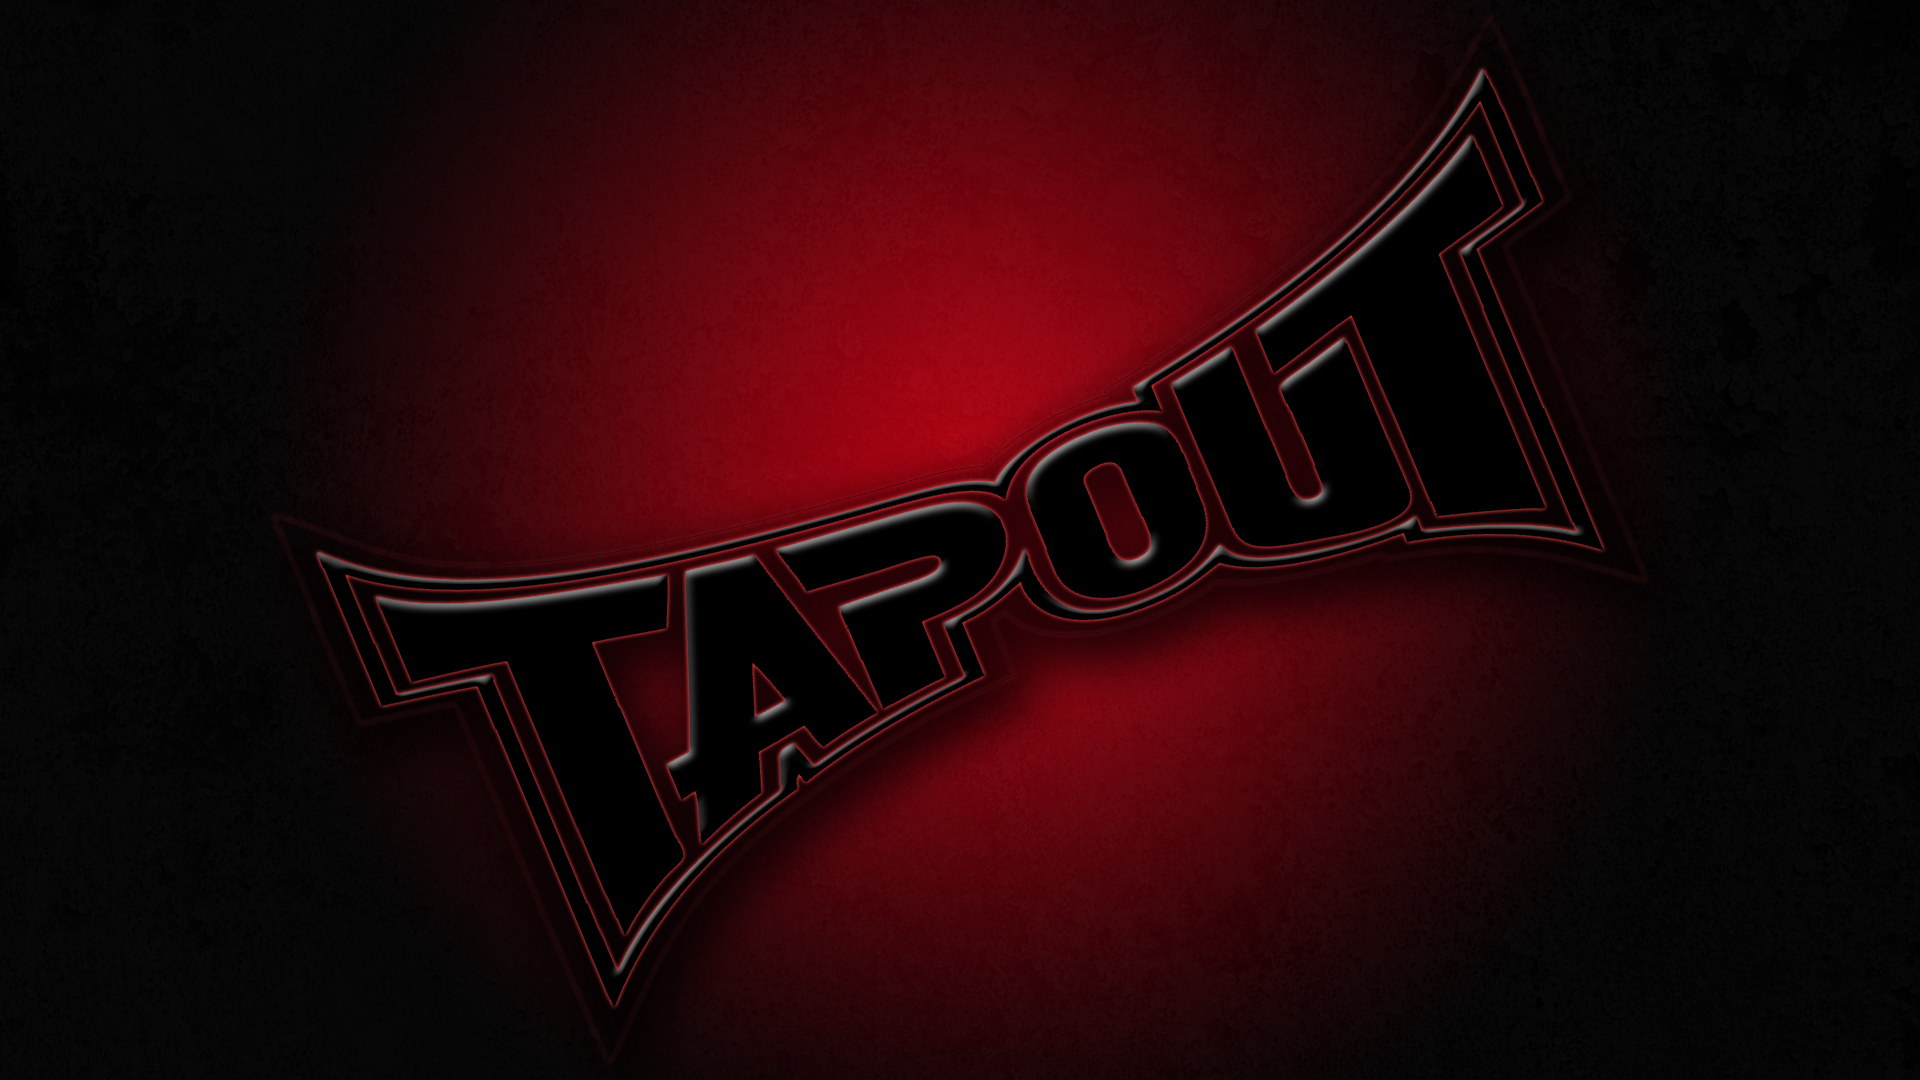 Black Big Tapout Logo Red Glow Angled Red Grunge Background